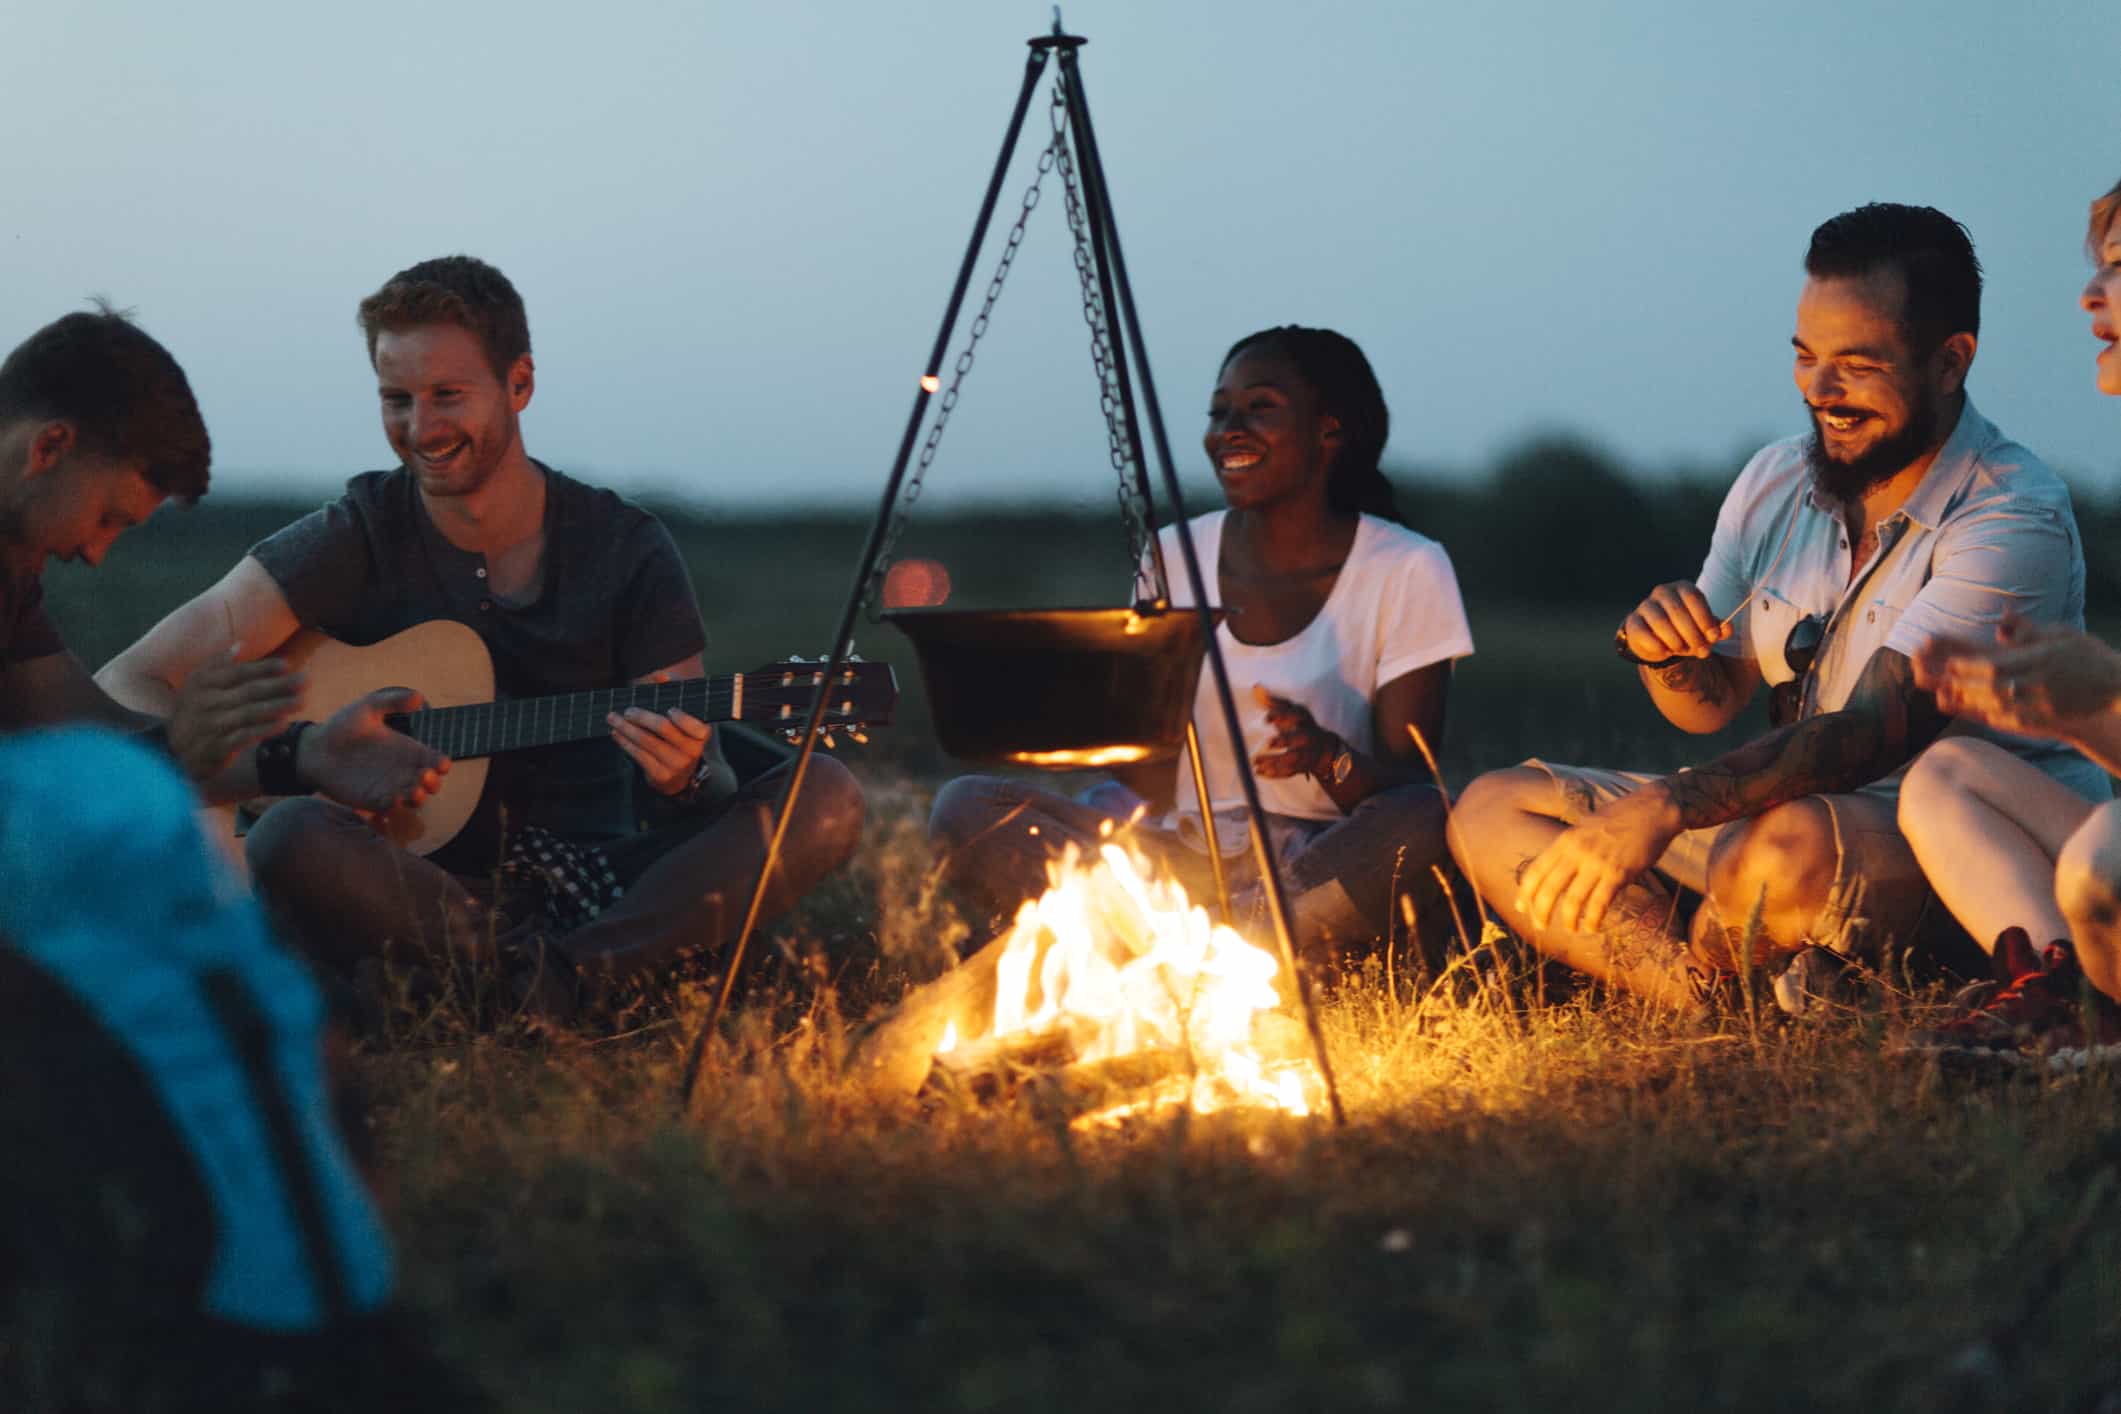 Friends playing music and smiling around the campfire